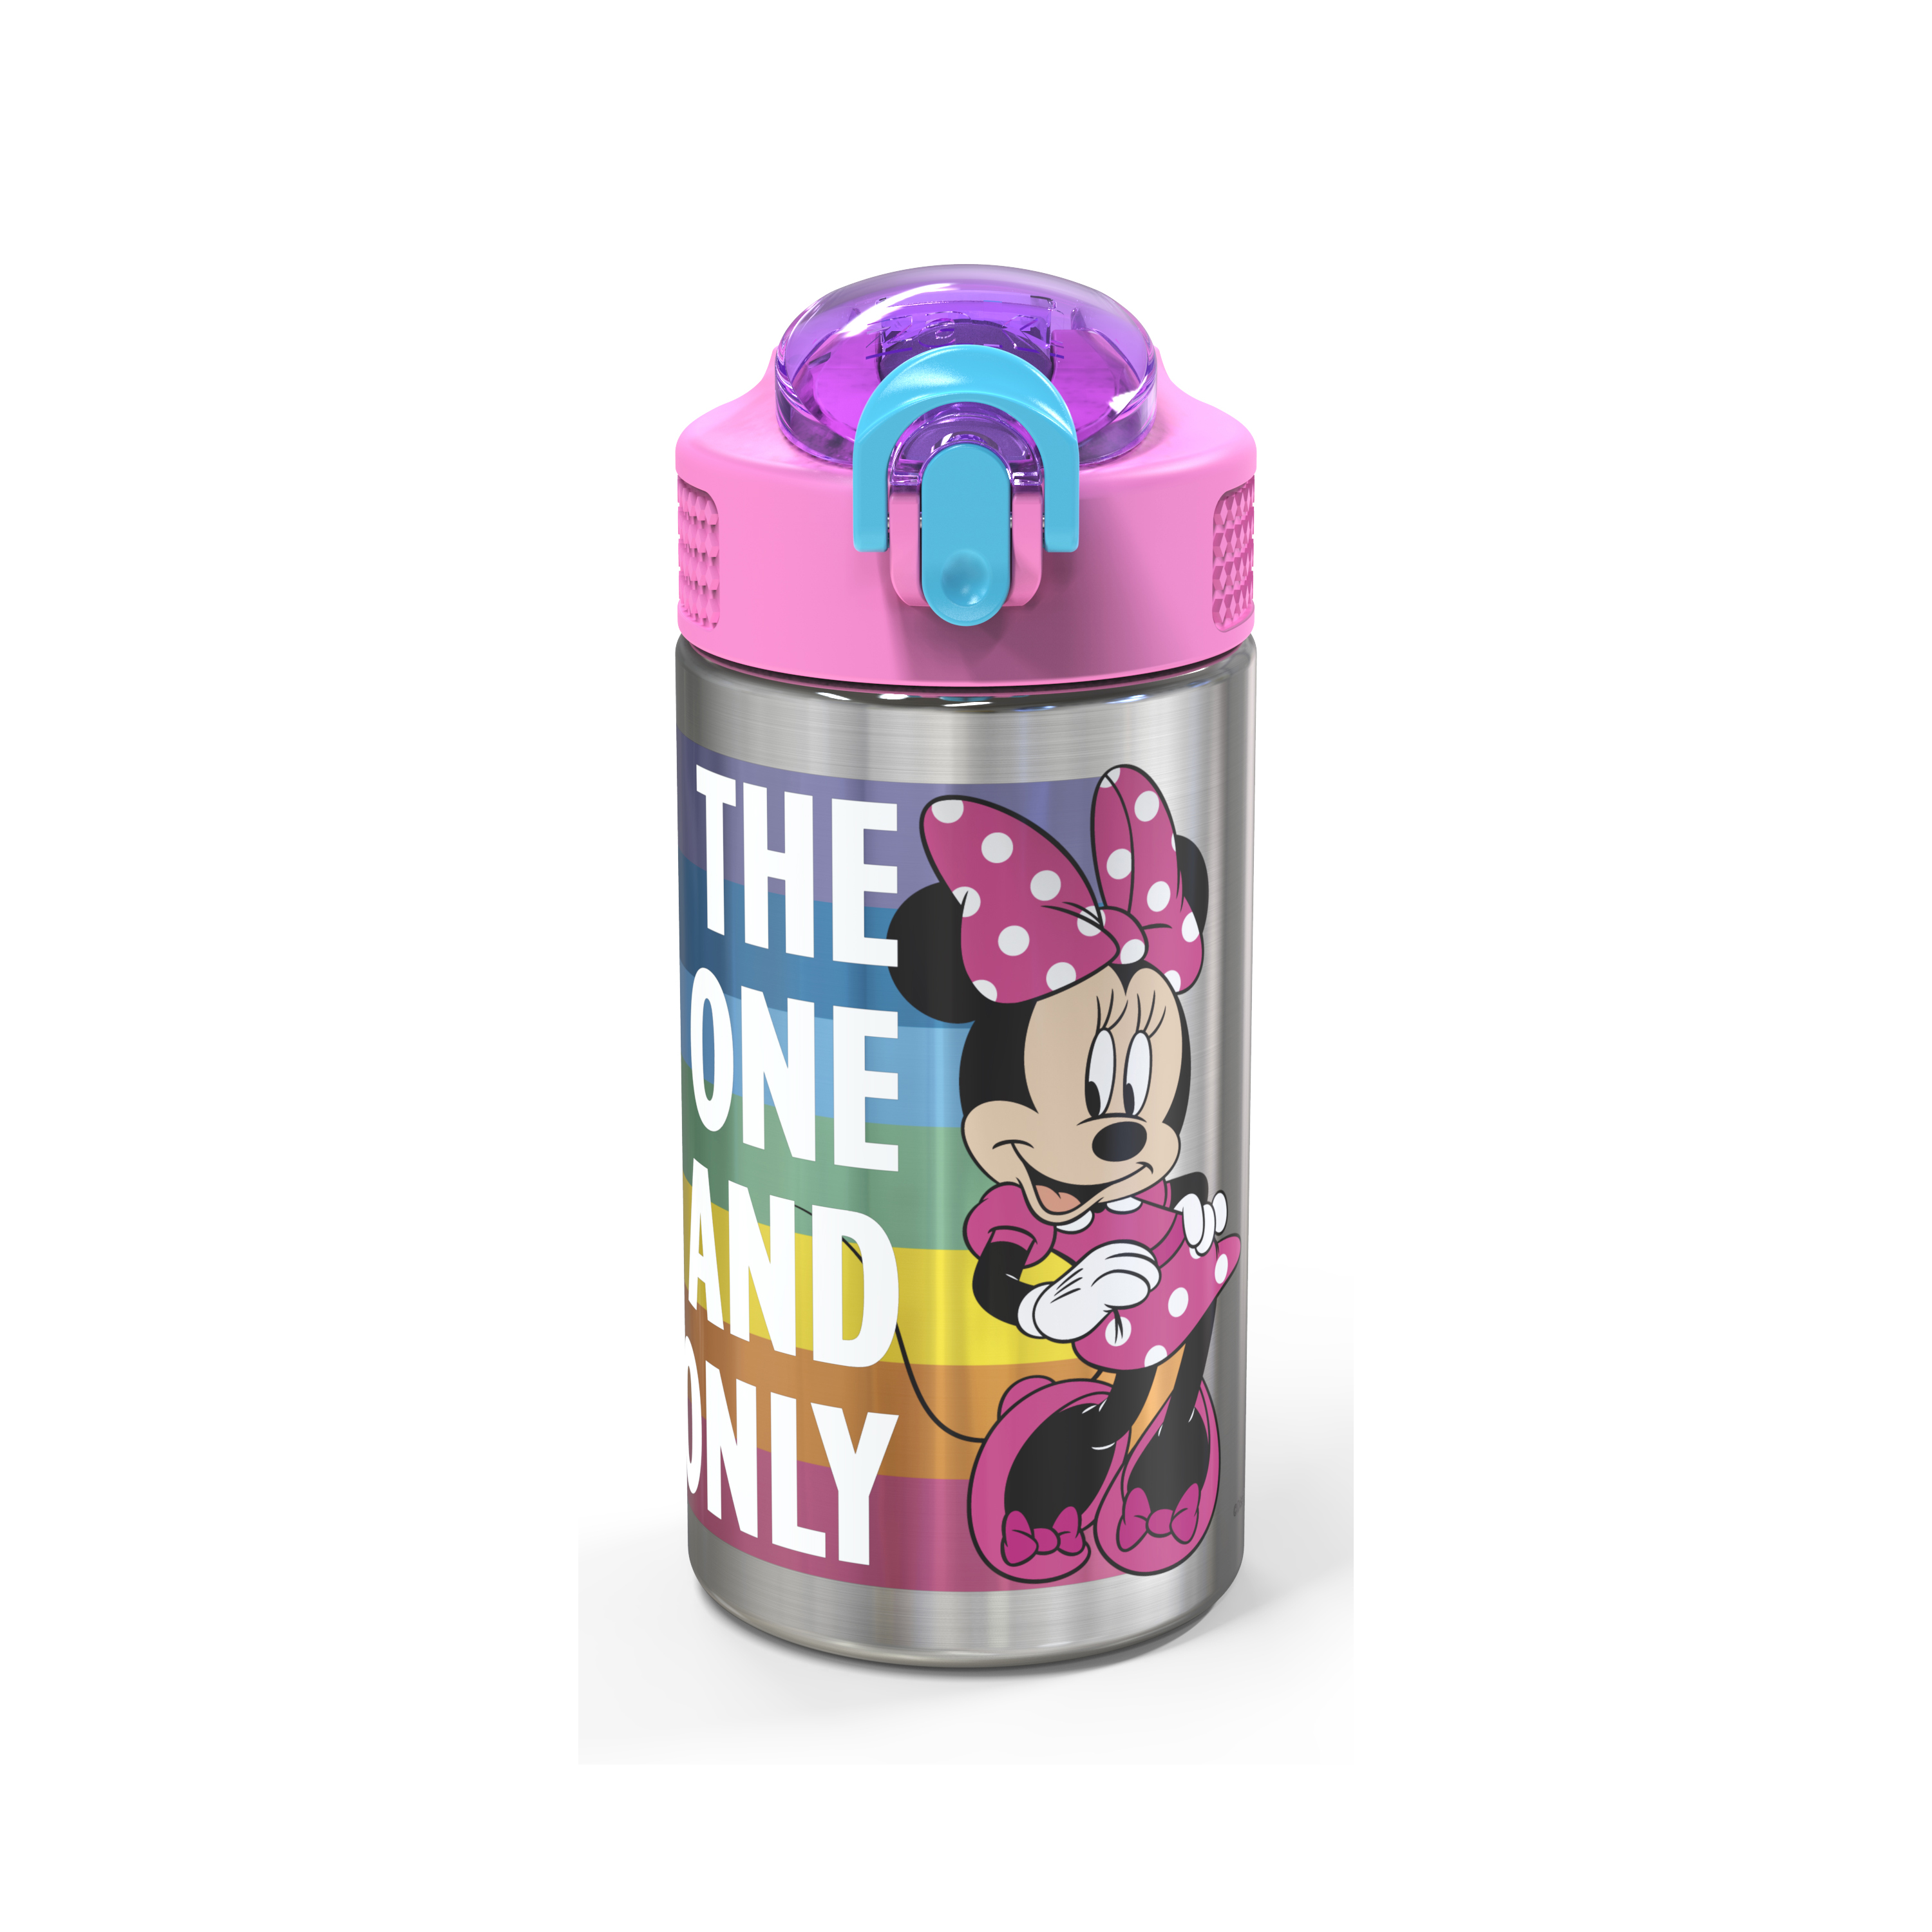 Disney 15.5 ounce Stainless Steel Water Bottle with Built-in Carrying Loop, Minnie Mouse slideshow image 1